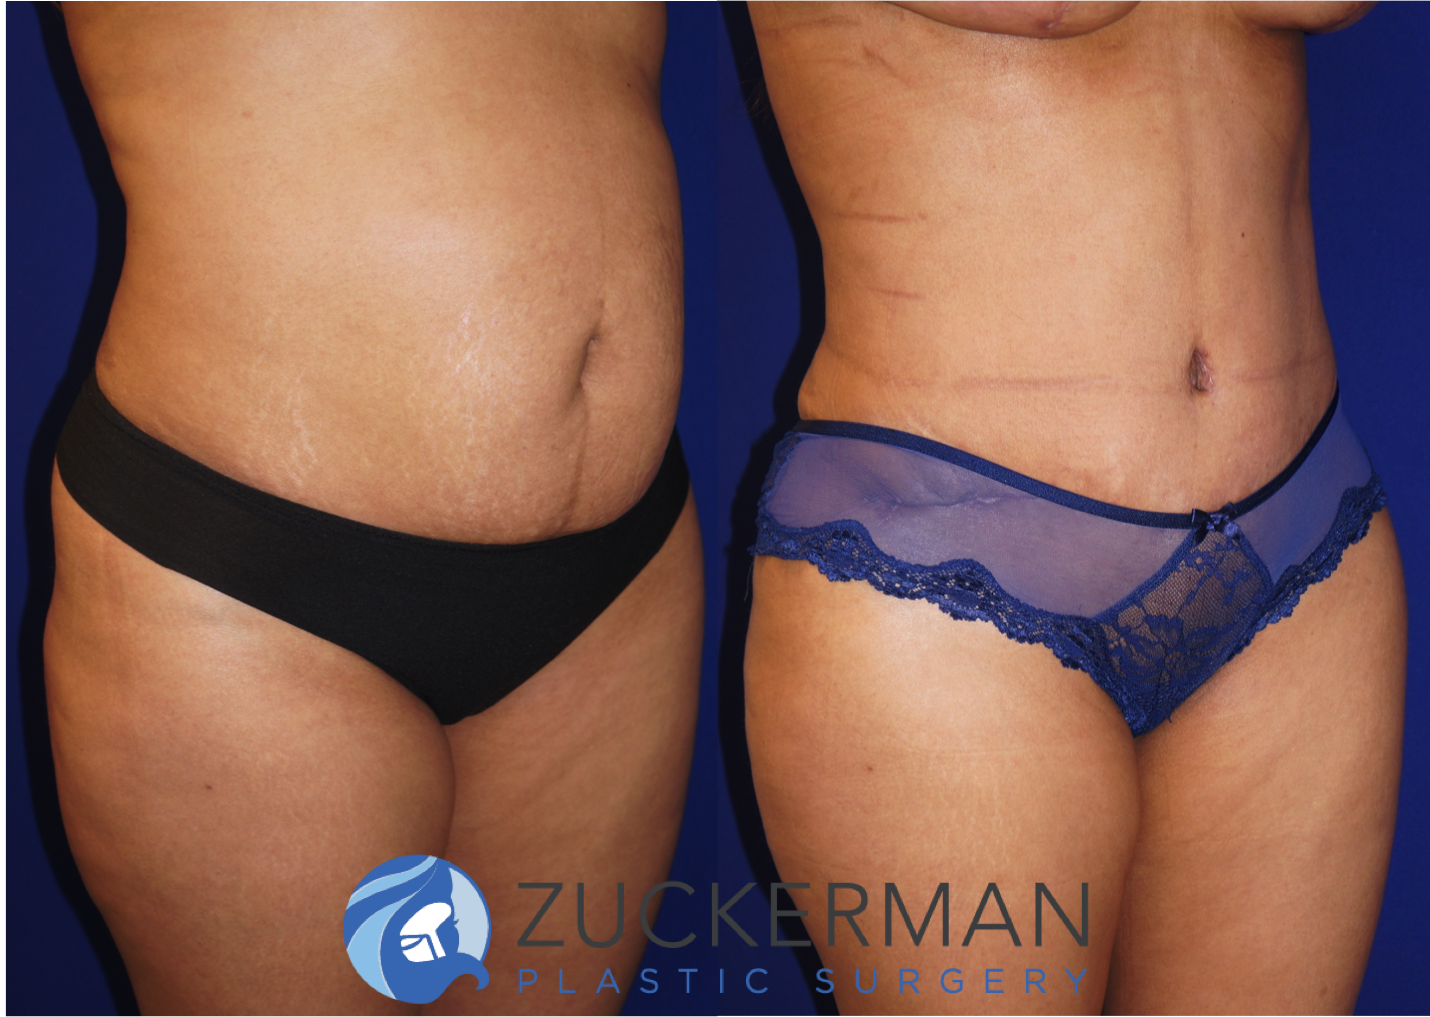 Right oblique view of an abdominoplasty (tummy tuck) by Dr. Zuckerman, images taken before surgery and two months after. Includes liposuction to the abdomen and flanks.